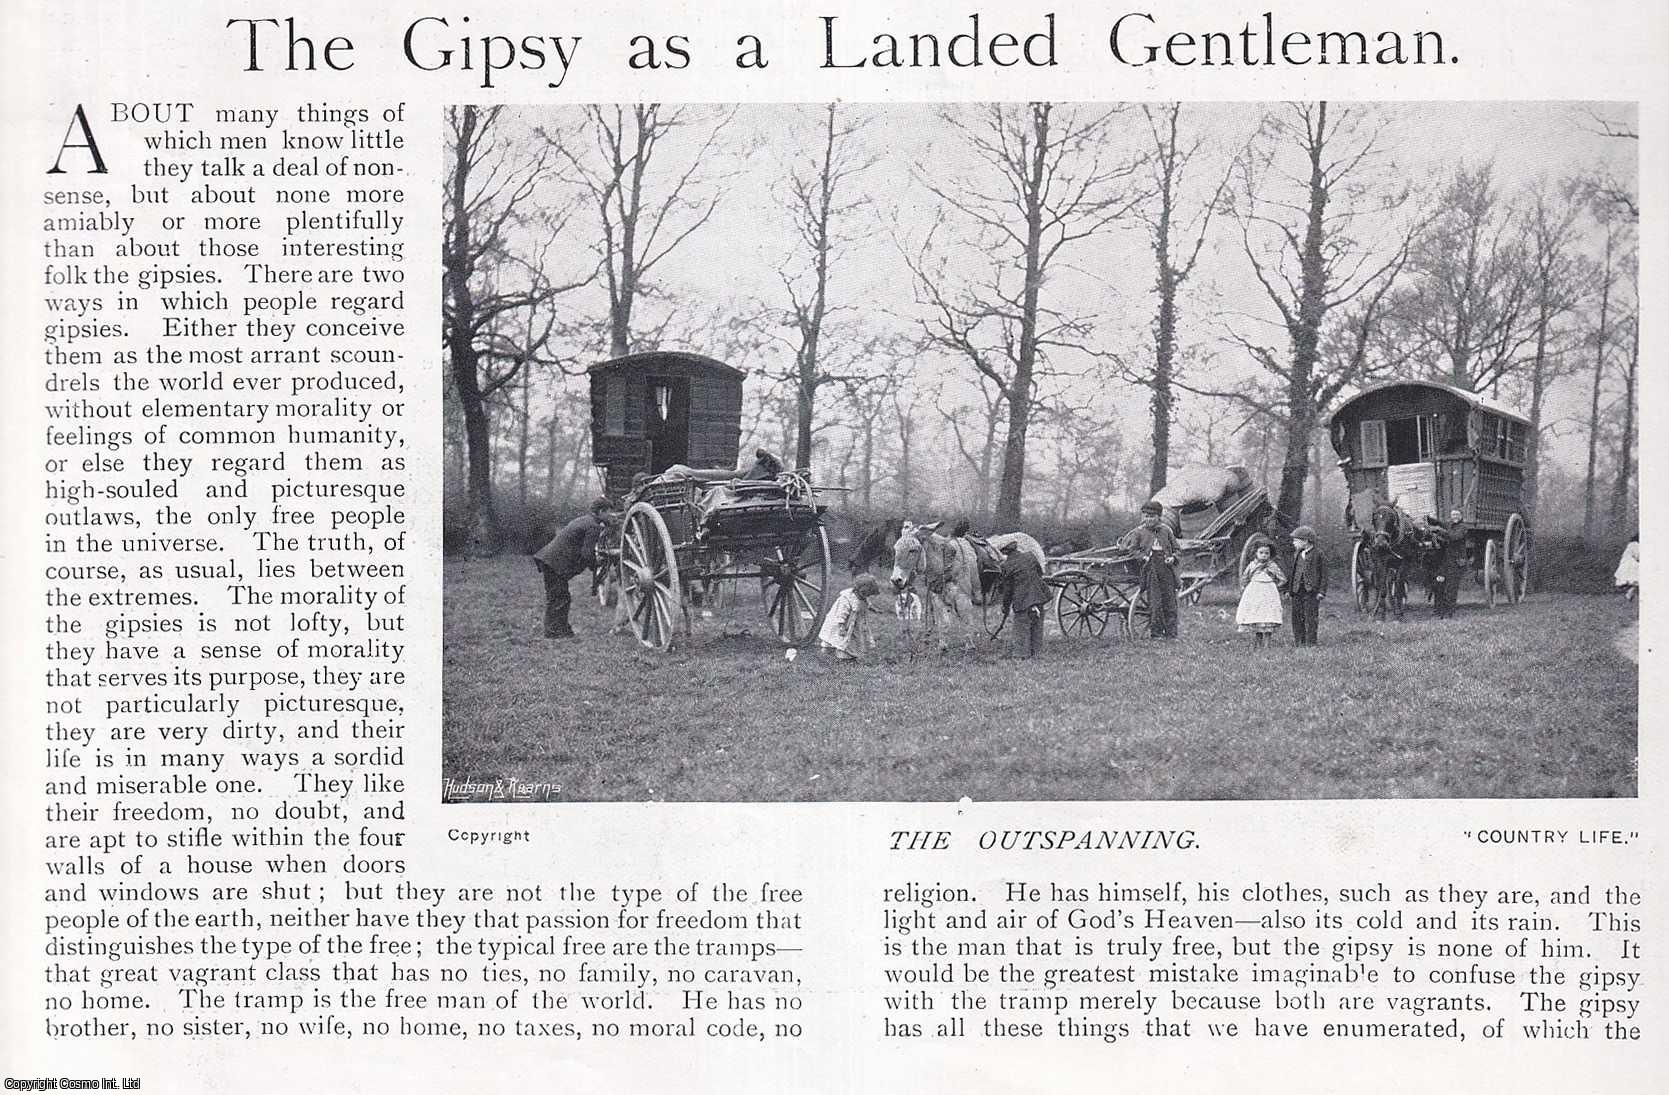 COUNTRY LIFE - The Gypsy as a Landed Gentleman. Several pictures and accompanying text, removed from an original issue of Country Life Magazine, 1898.